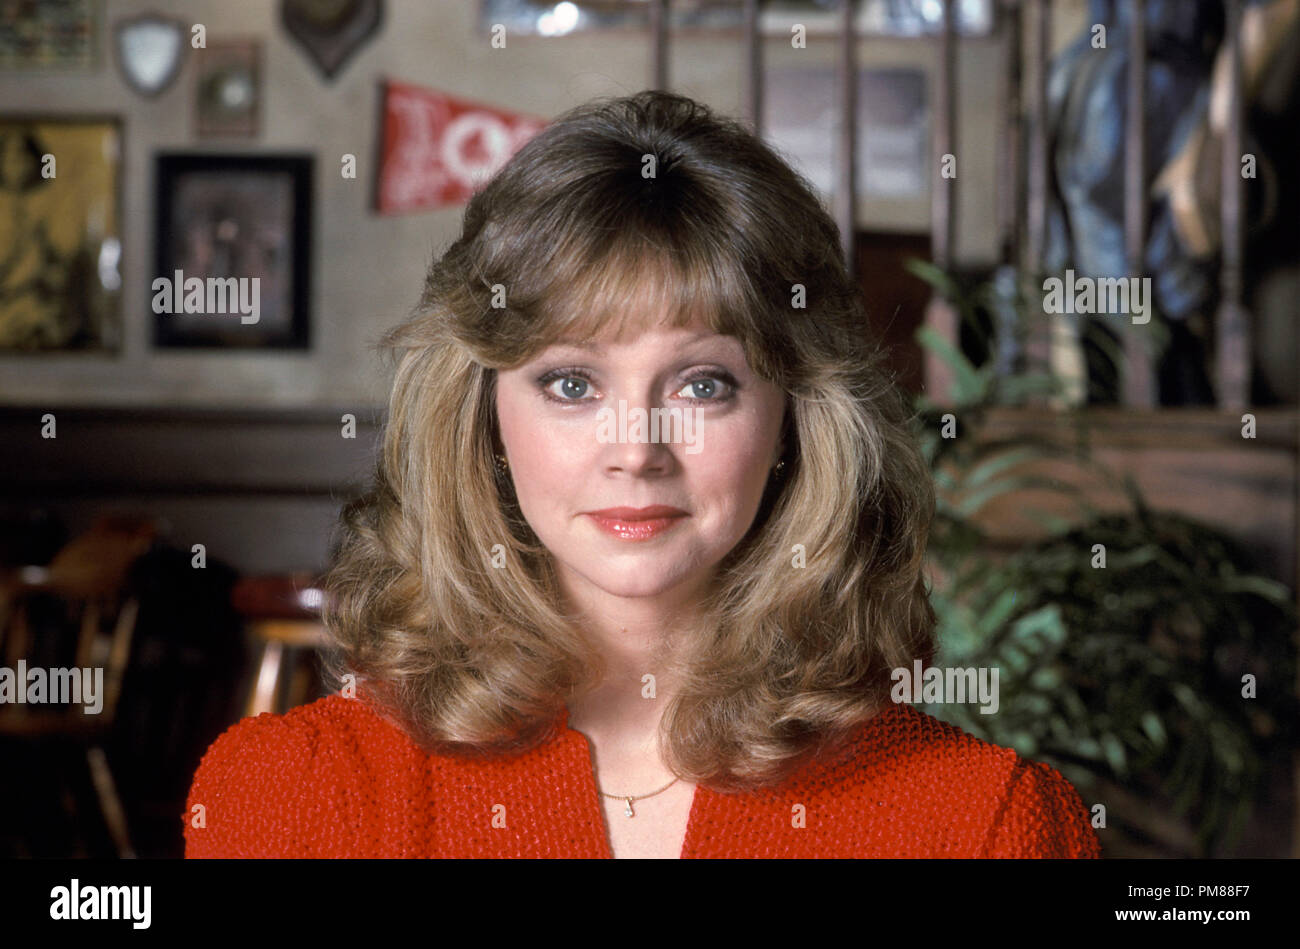 Pictures of shelley long